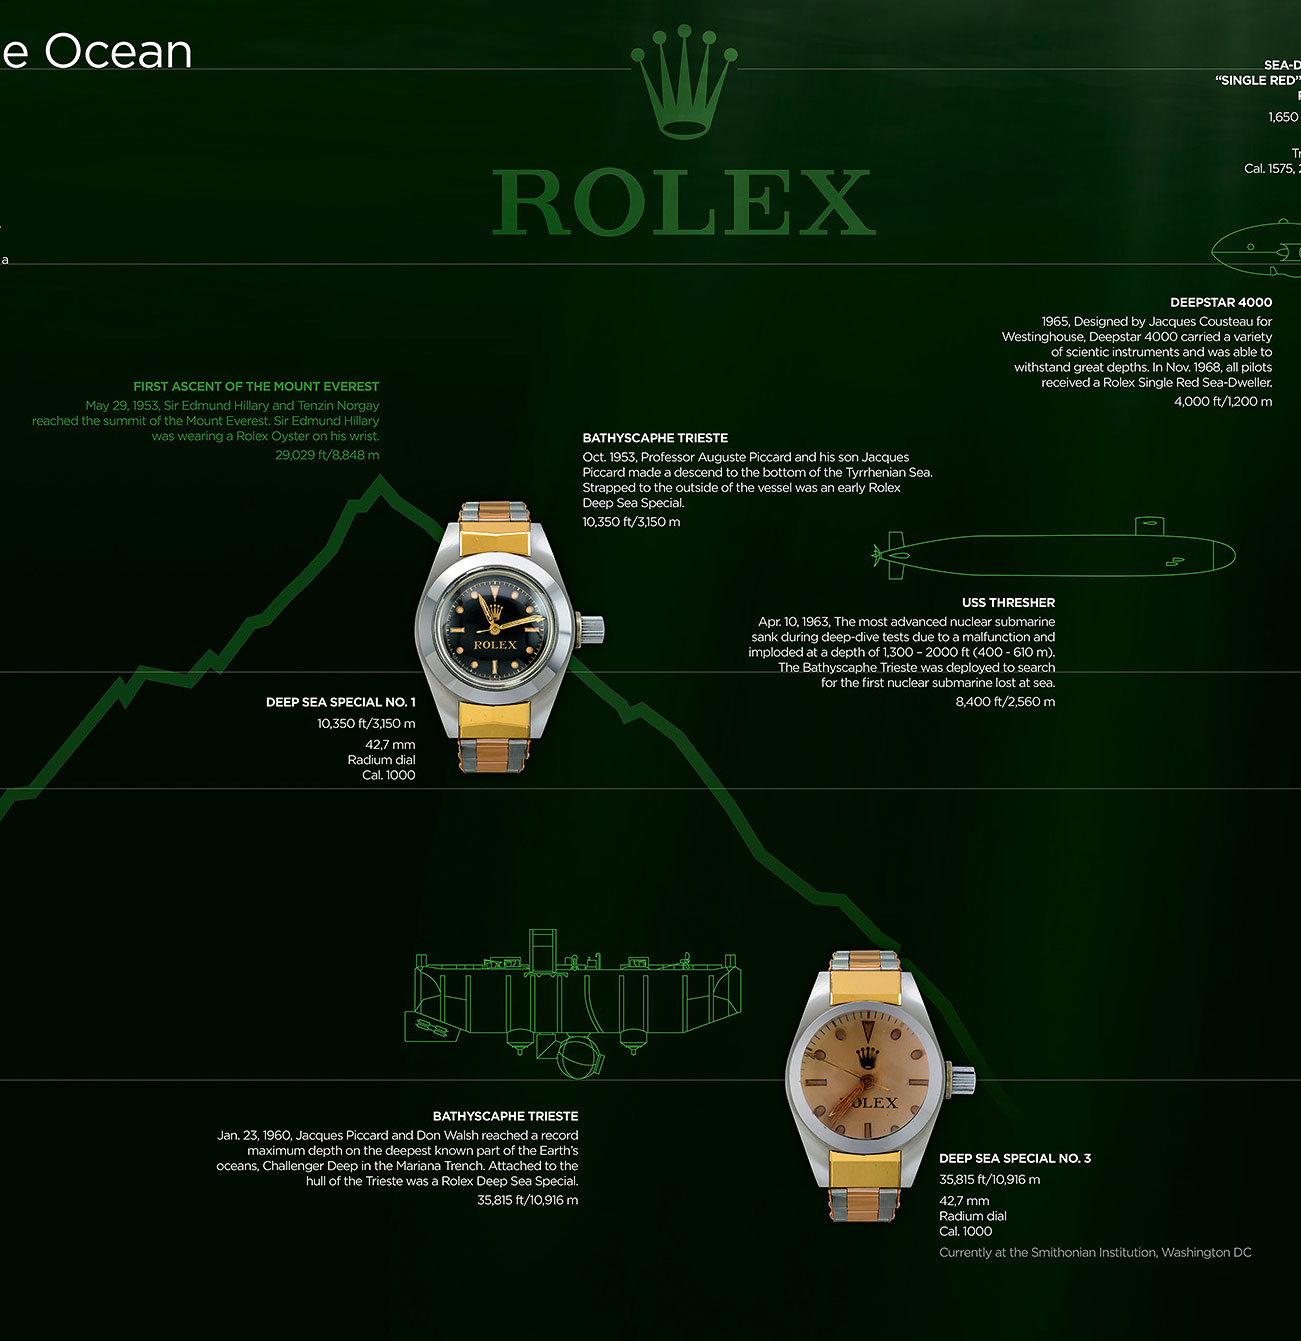 Rolex presents: The Trieste's Deepest Dive (Extended) - Video